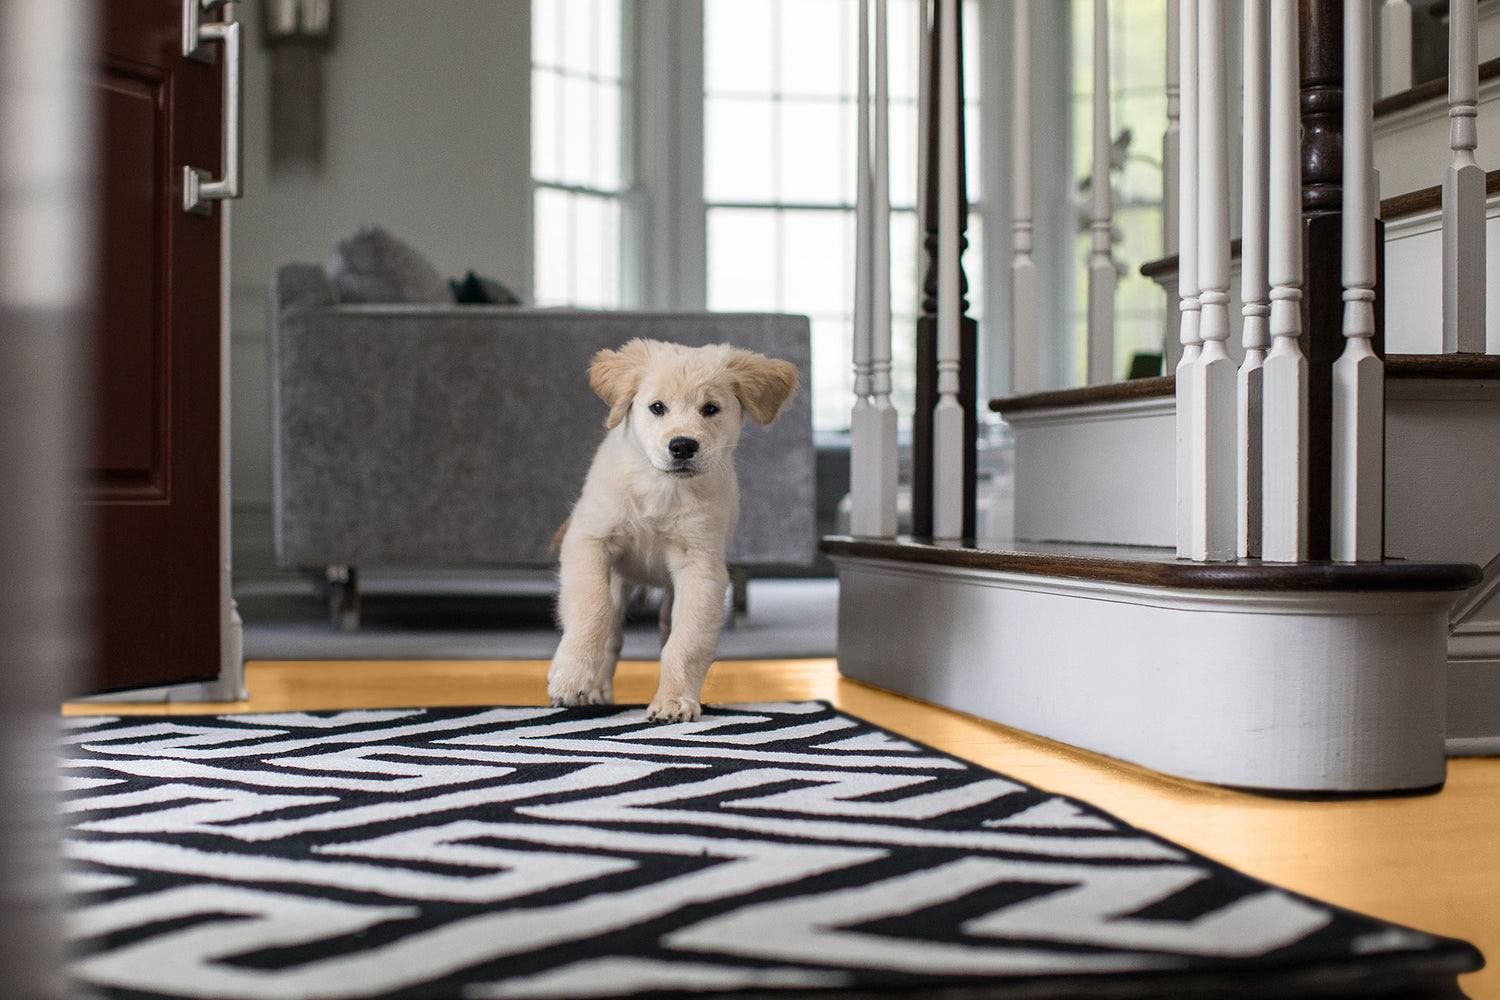 Puppy running across a secure rug with Gorilla Grip rug pads in a cozy home